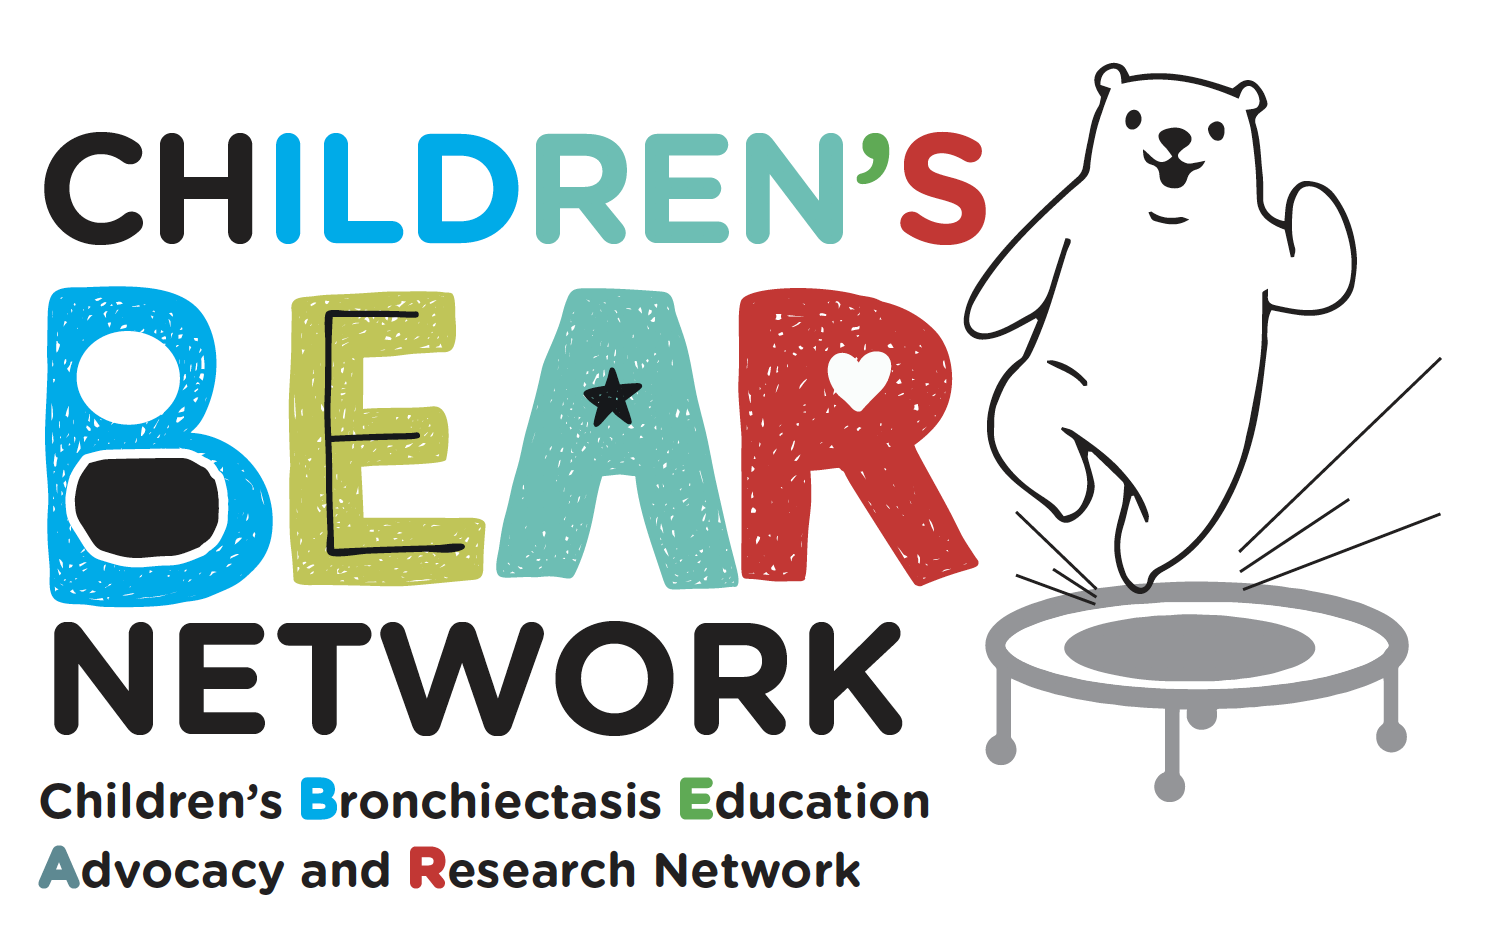 Children's Bronchiectasis Education, Advocacy and Research Network